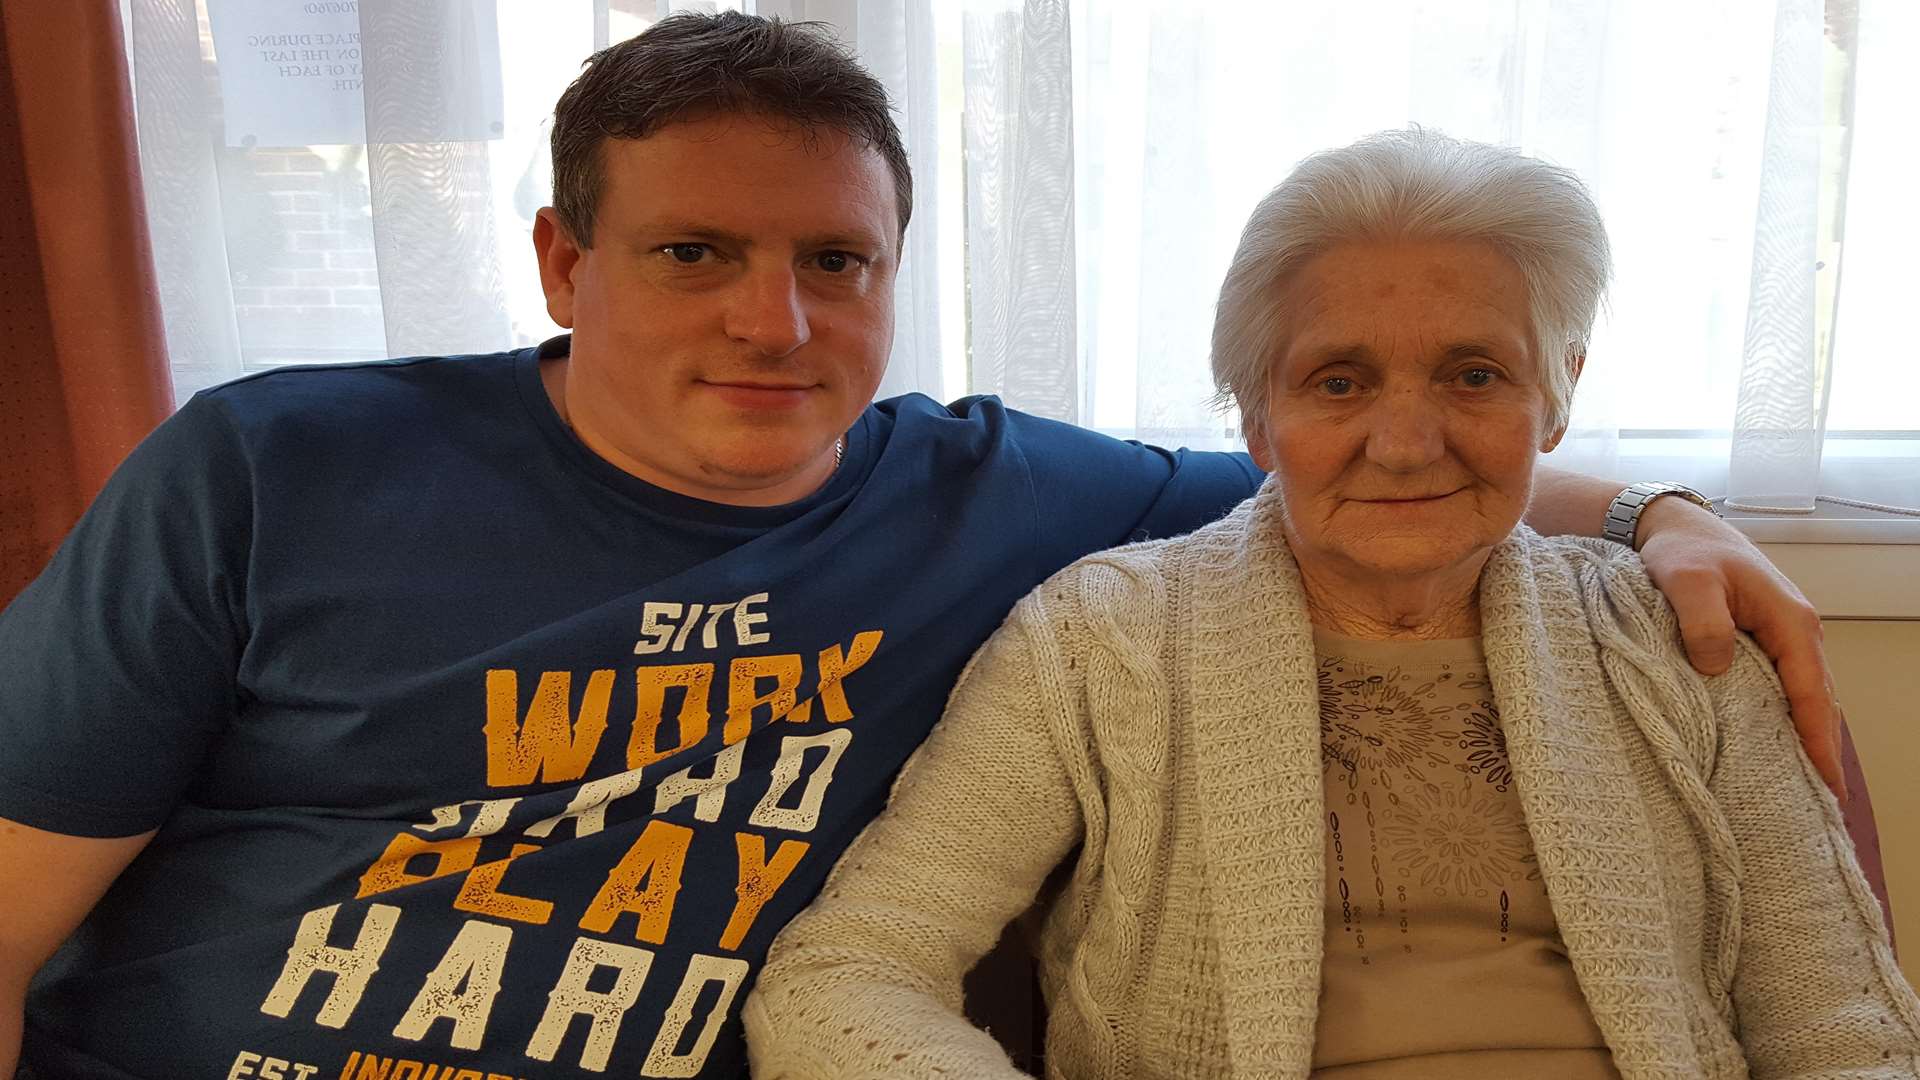 Paul Billing gave up his job to care for mum Maureen when she was diagnosed with dementia